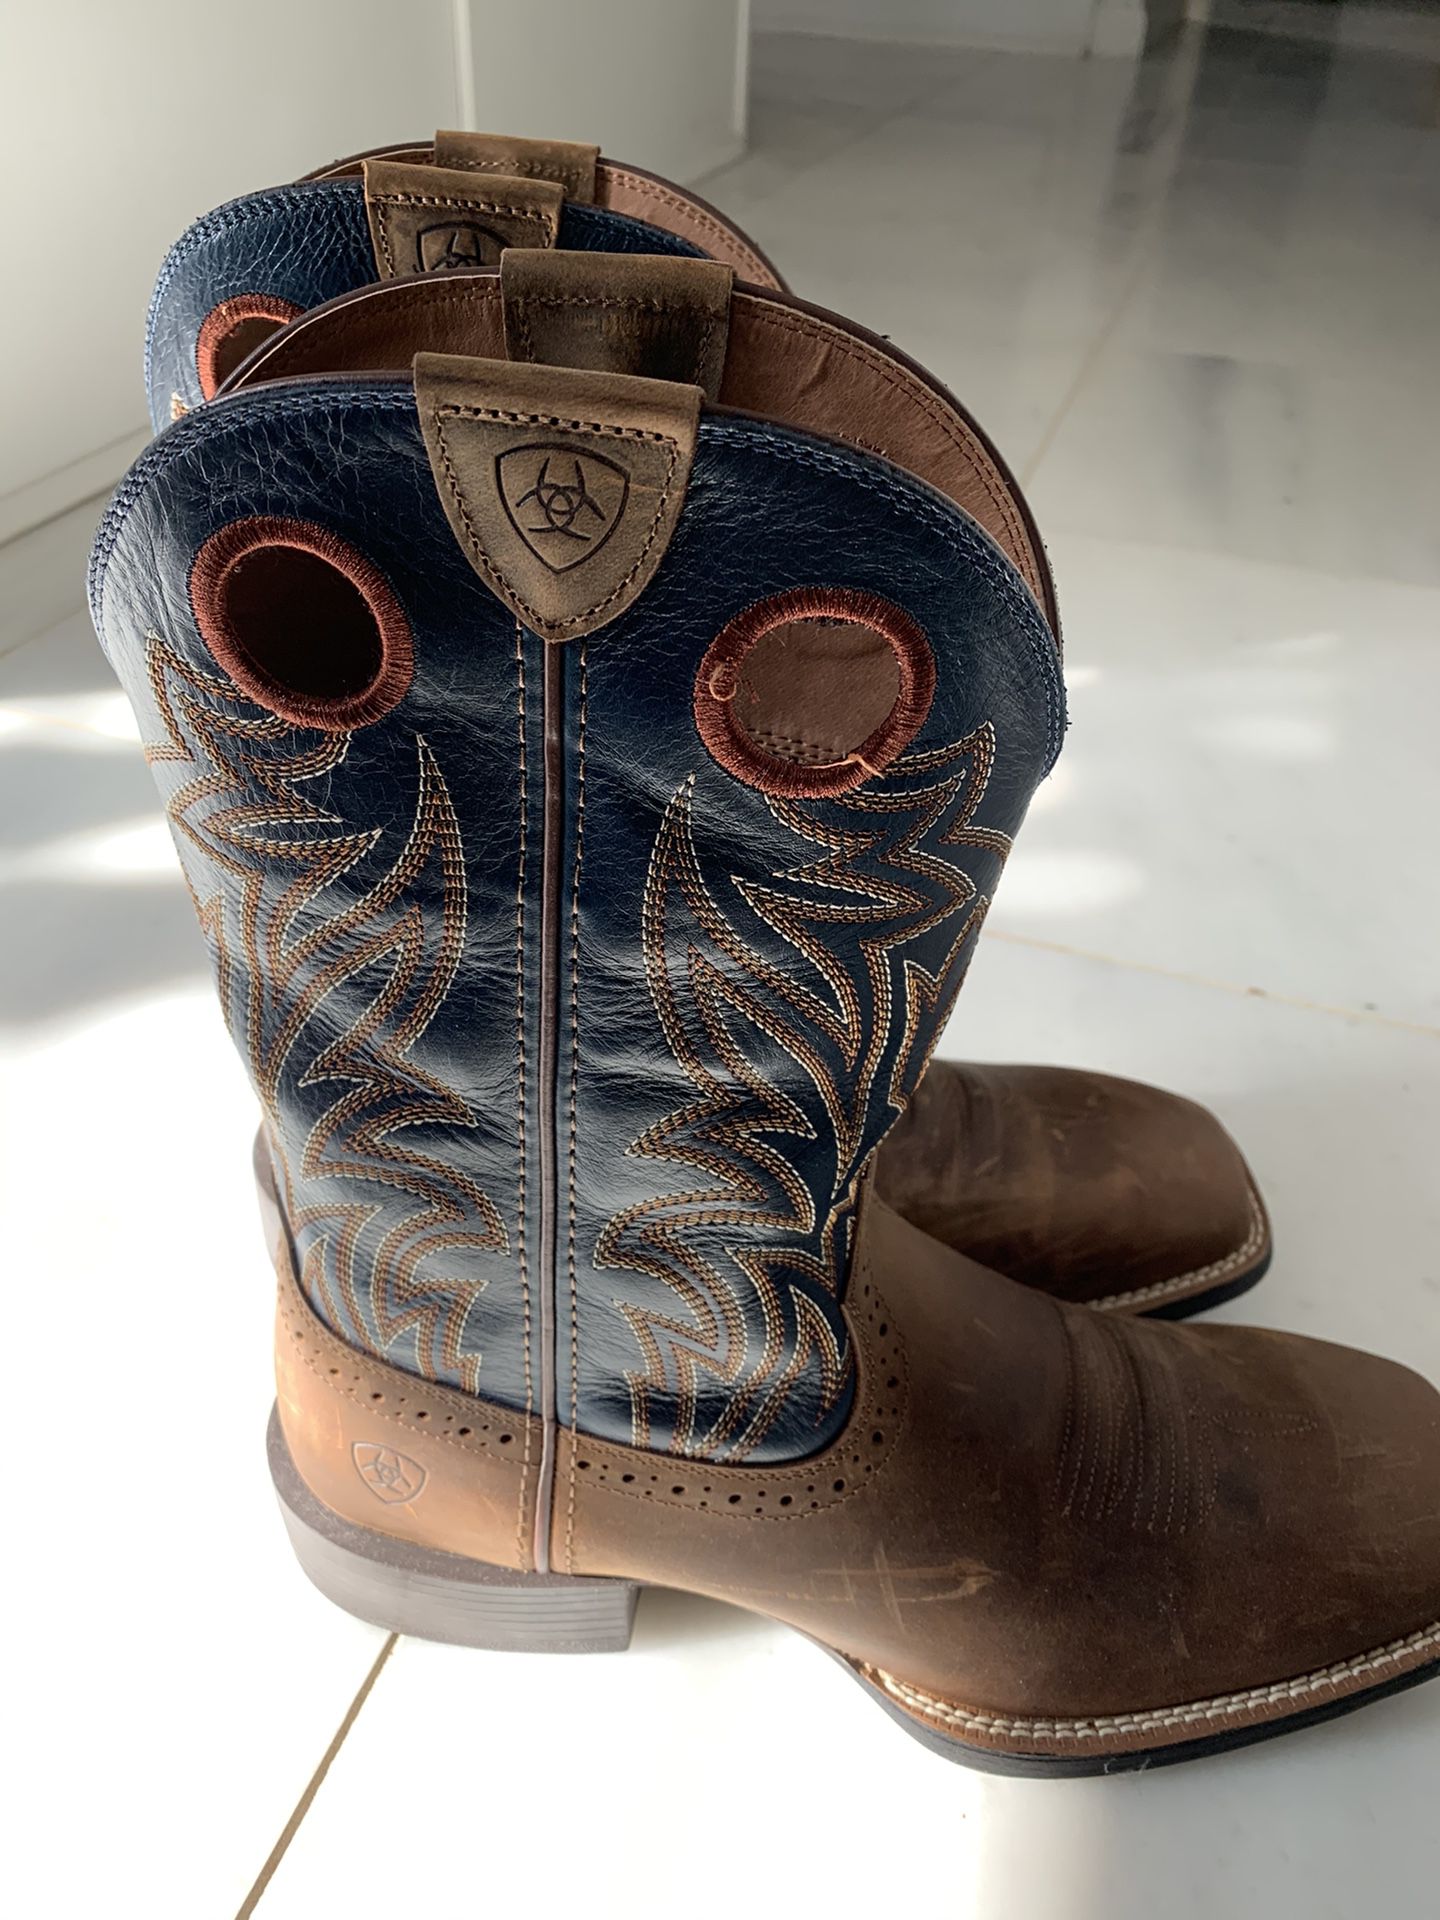 Brand New Mens Ariat Boots - size 10